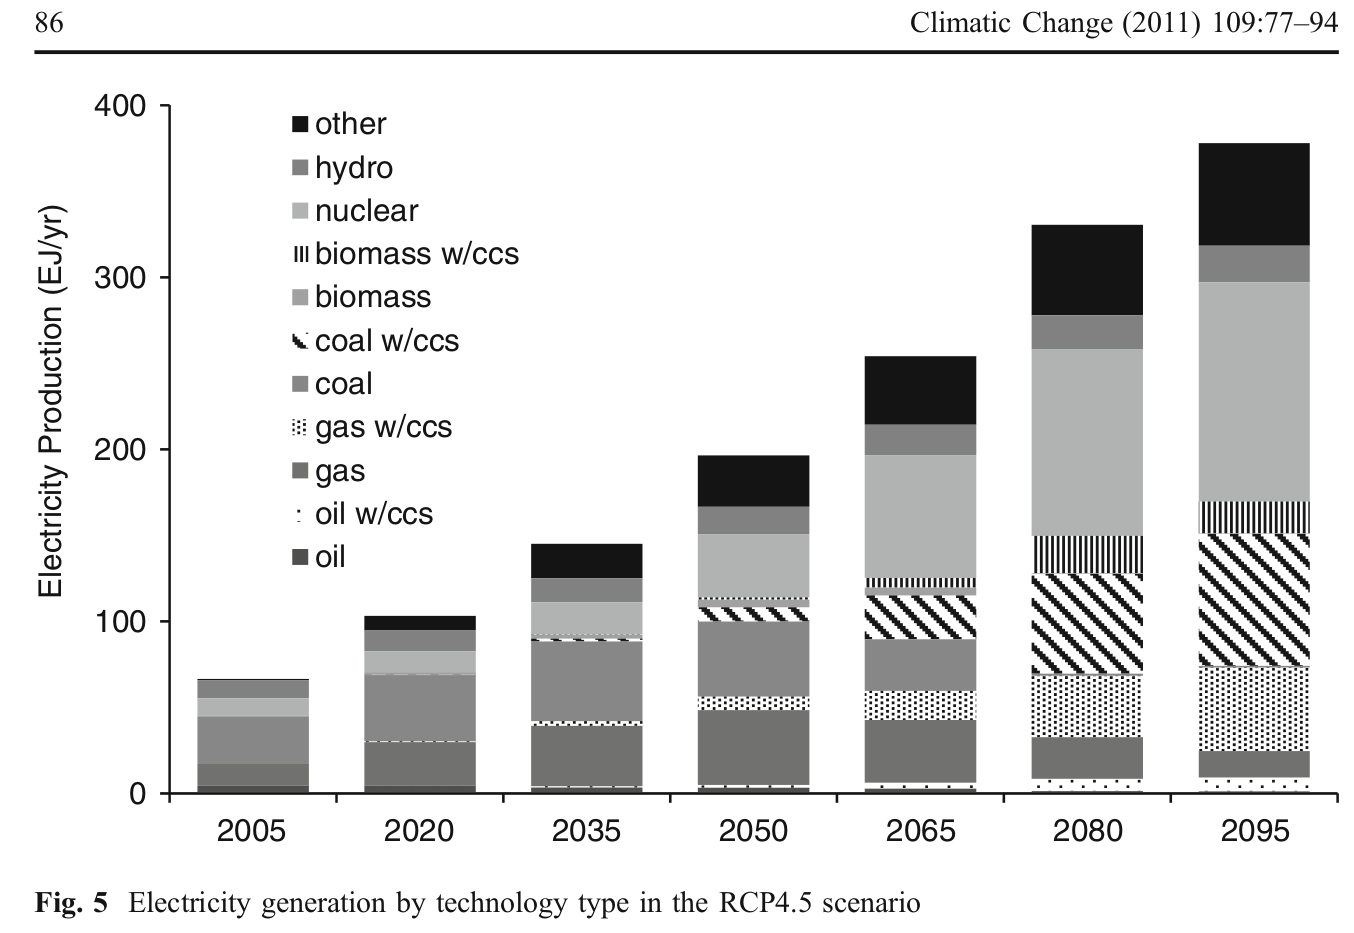 Electricity generation by technology type in the RCP4.5 scenario 2005 - 2095